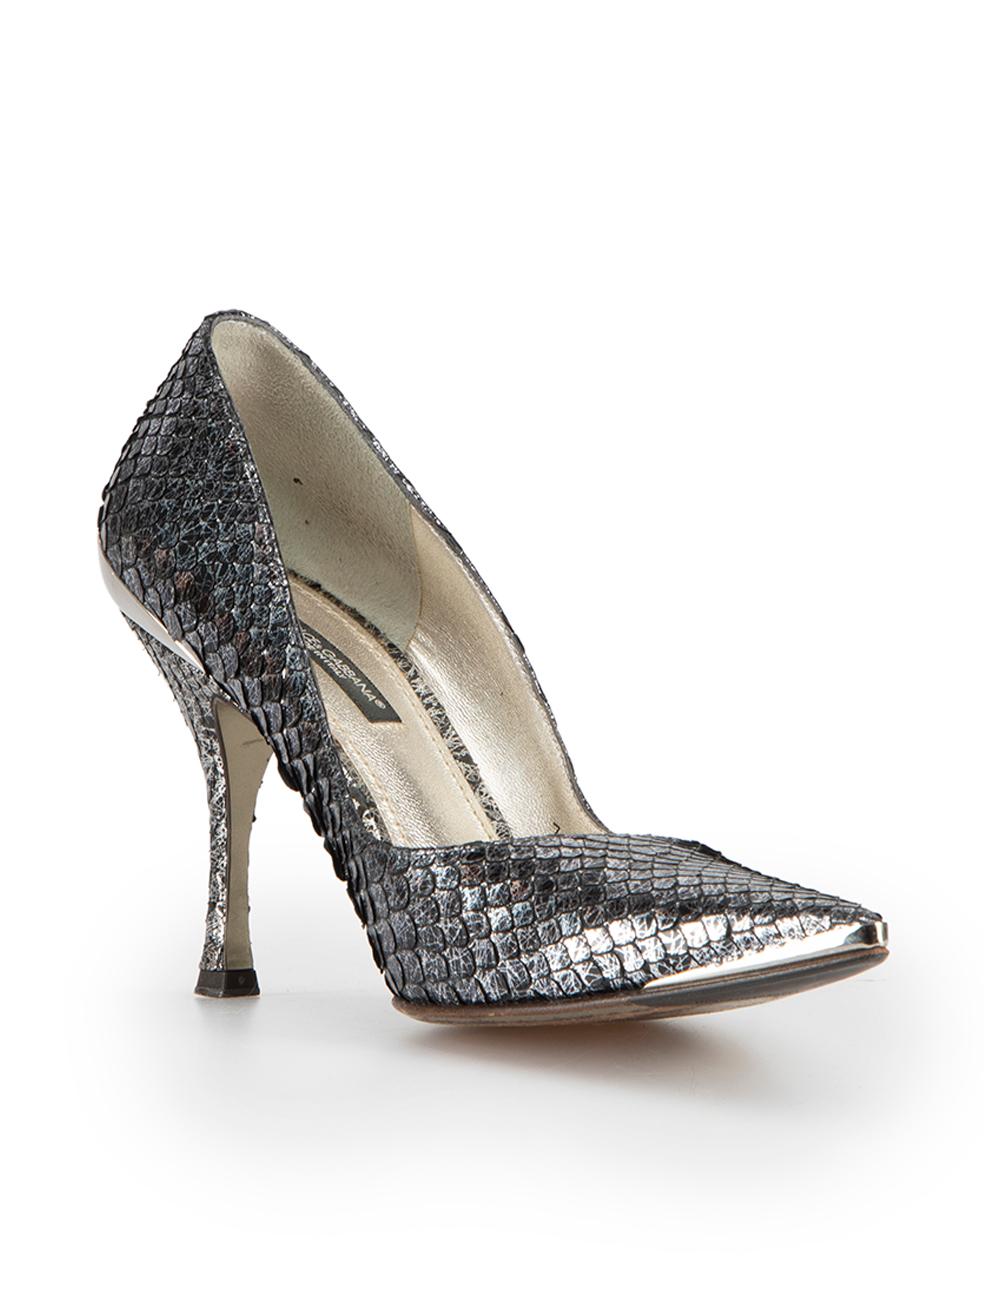 CONDITION is Very good. Minimal wear to shoes is evident. Minimal wear to both footbeds and heels with scuffing on this used Dolce & Gabbana designer resale item.



Details


Black and silver

Snakeskin

Slip-on heels

Pointed-toe

Mirror back heel